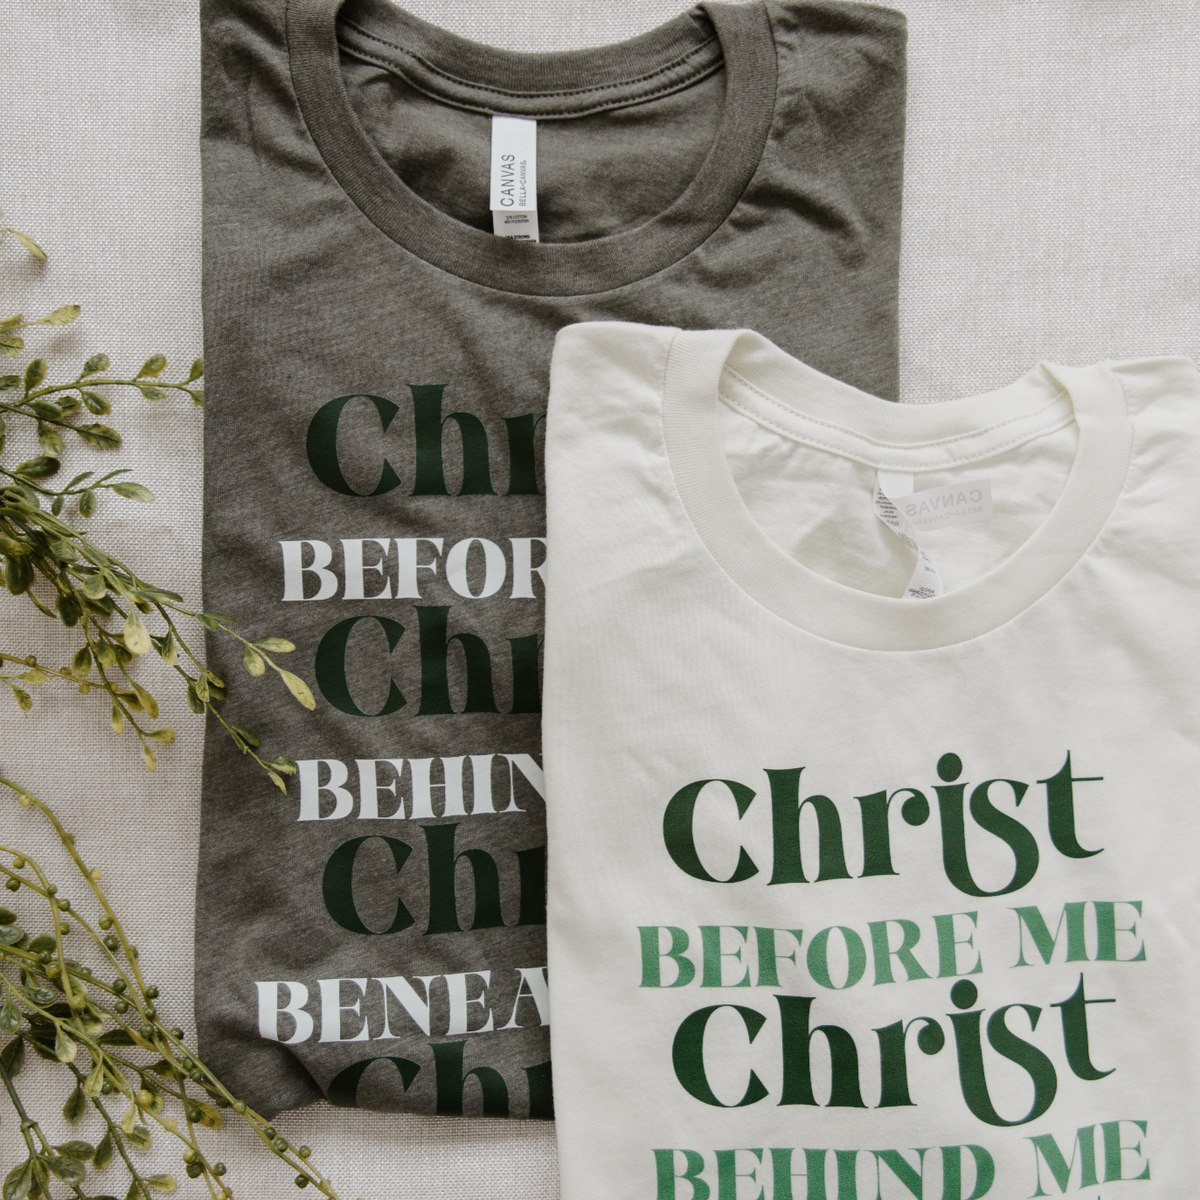 Breastplate of St. Patrick Tee | Heathered Military Green